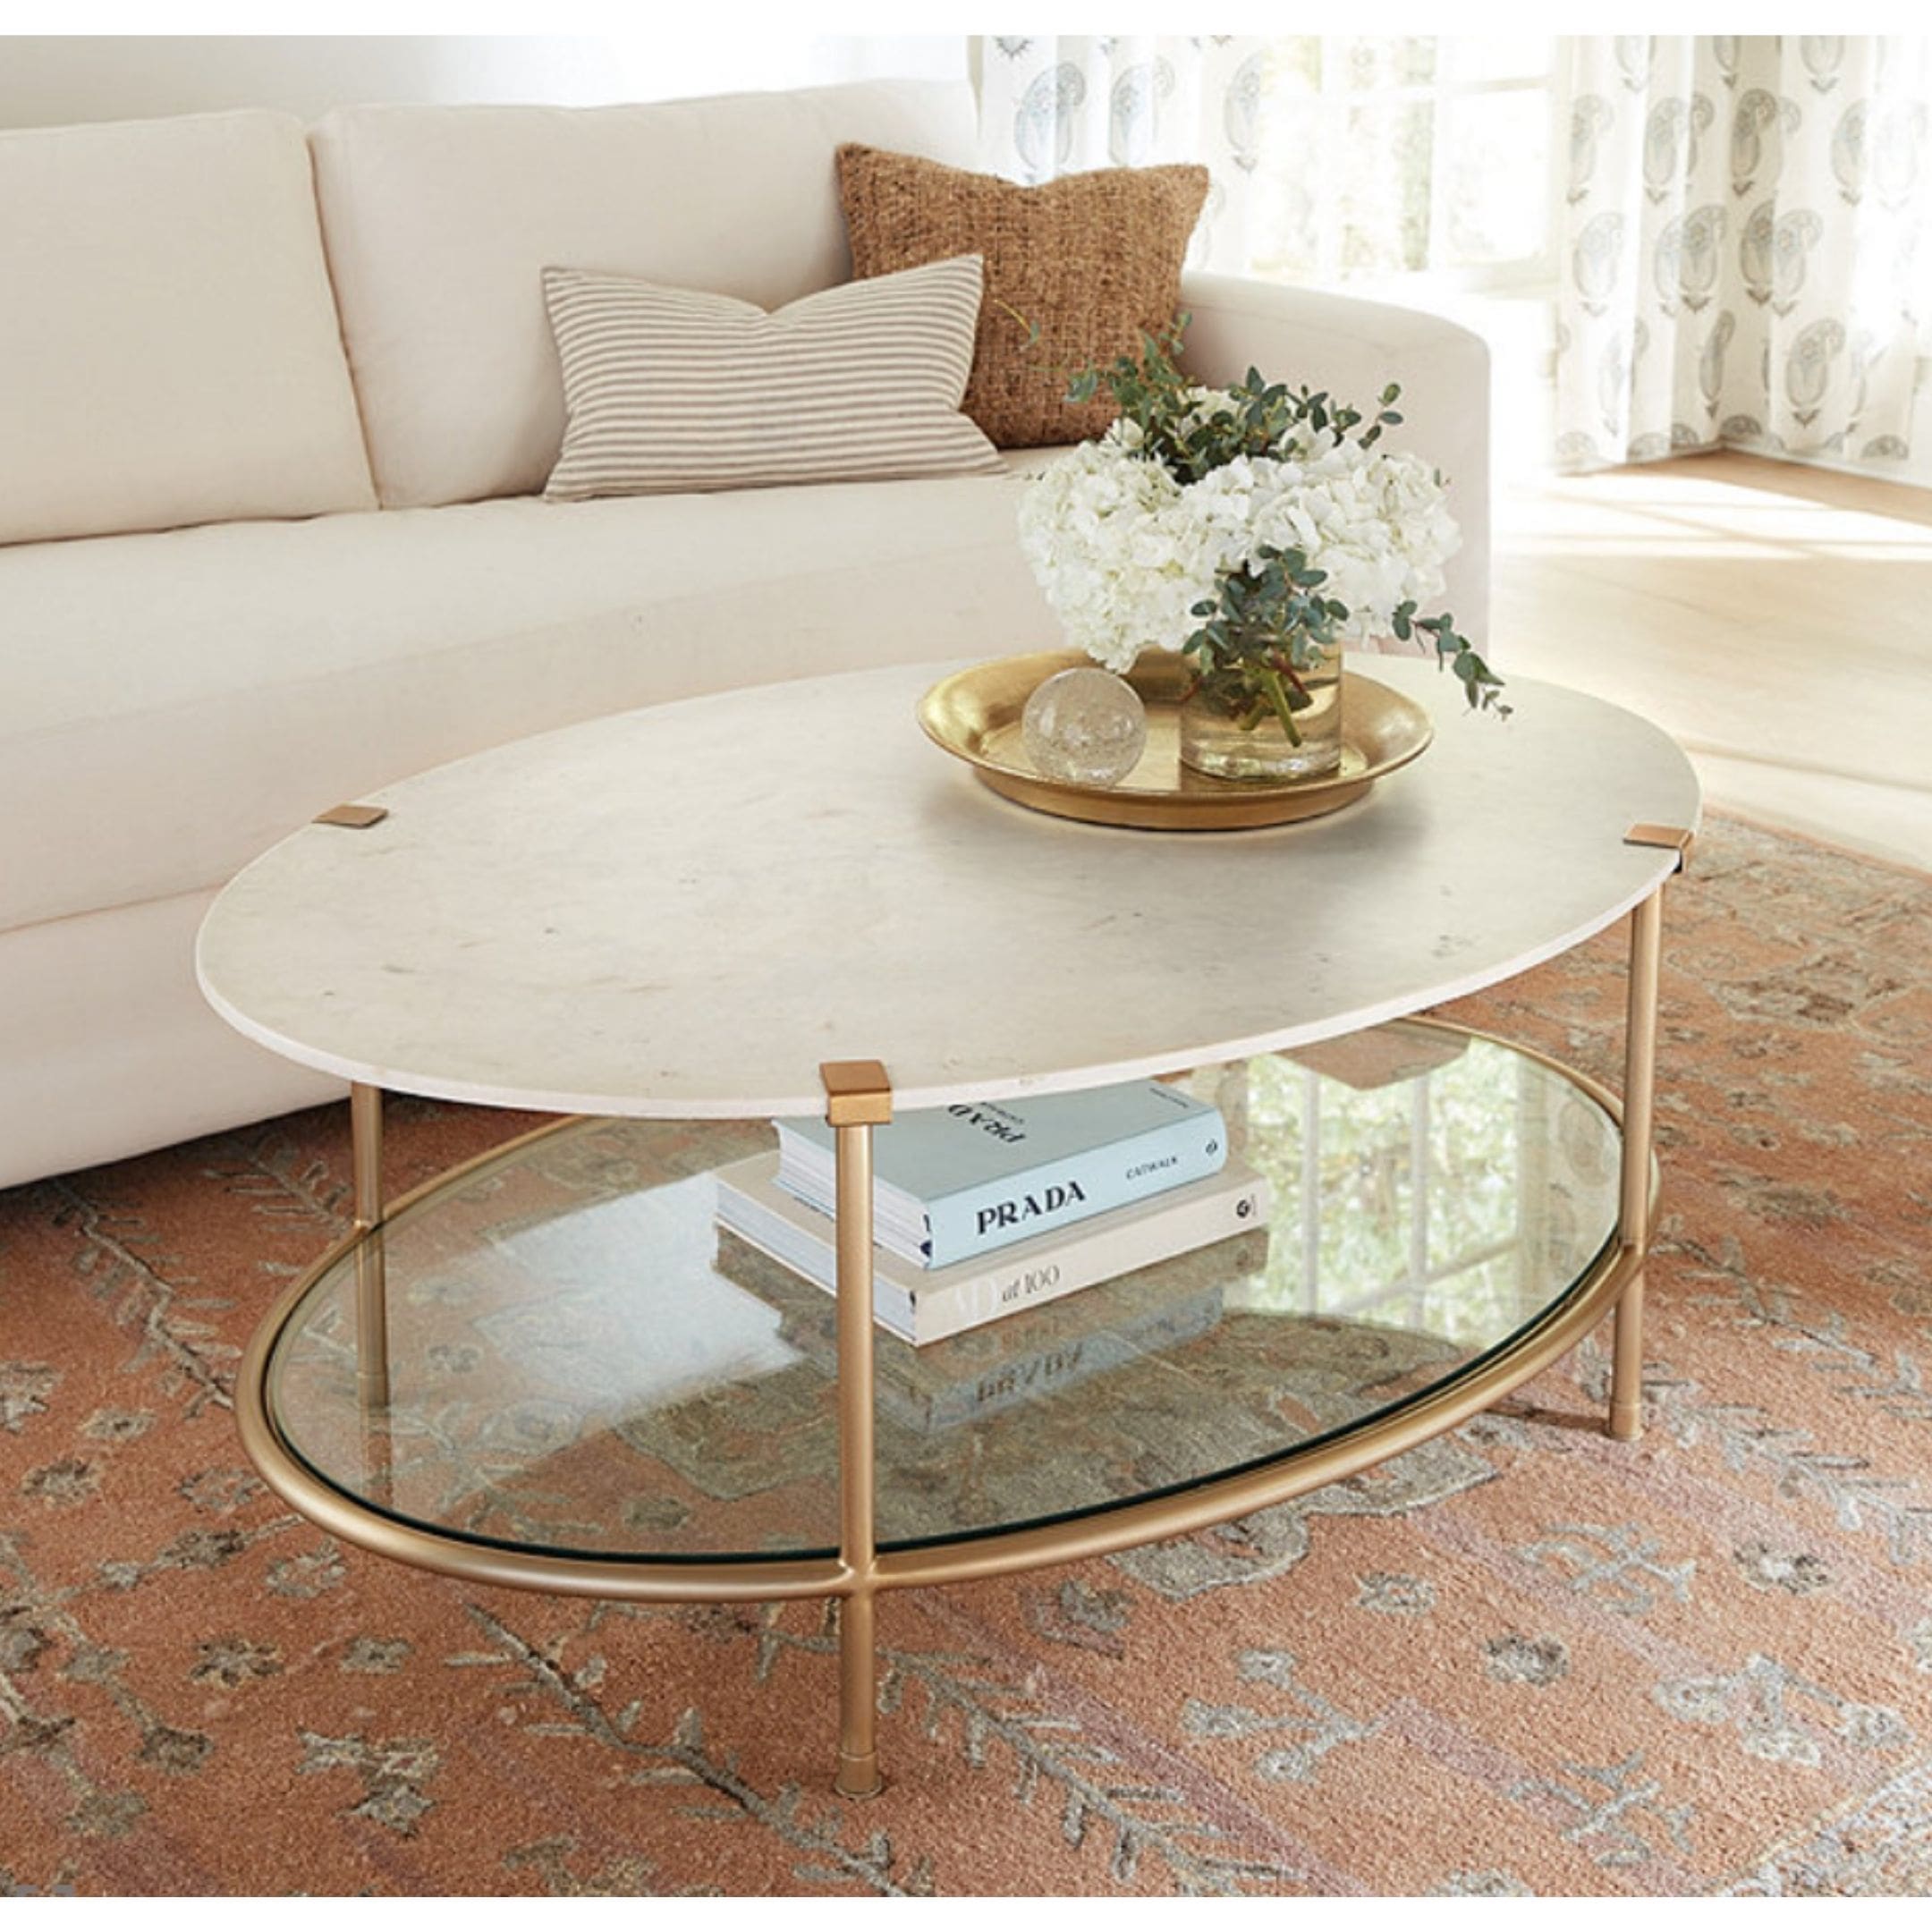 Gorgeous round marble coffee table with gold legs and storage.